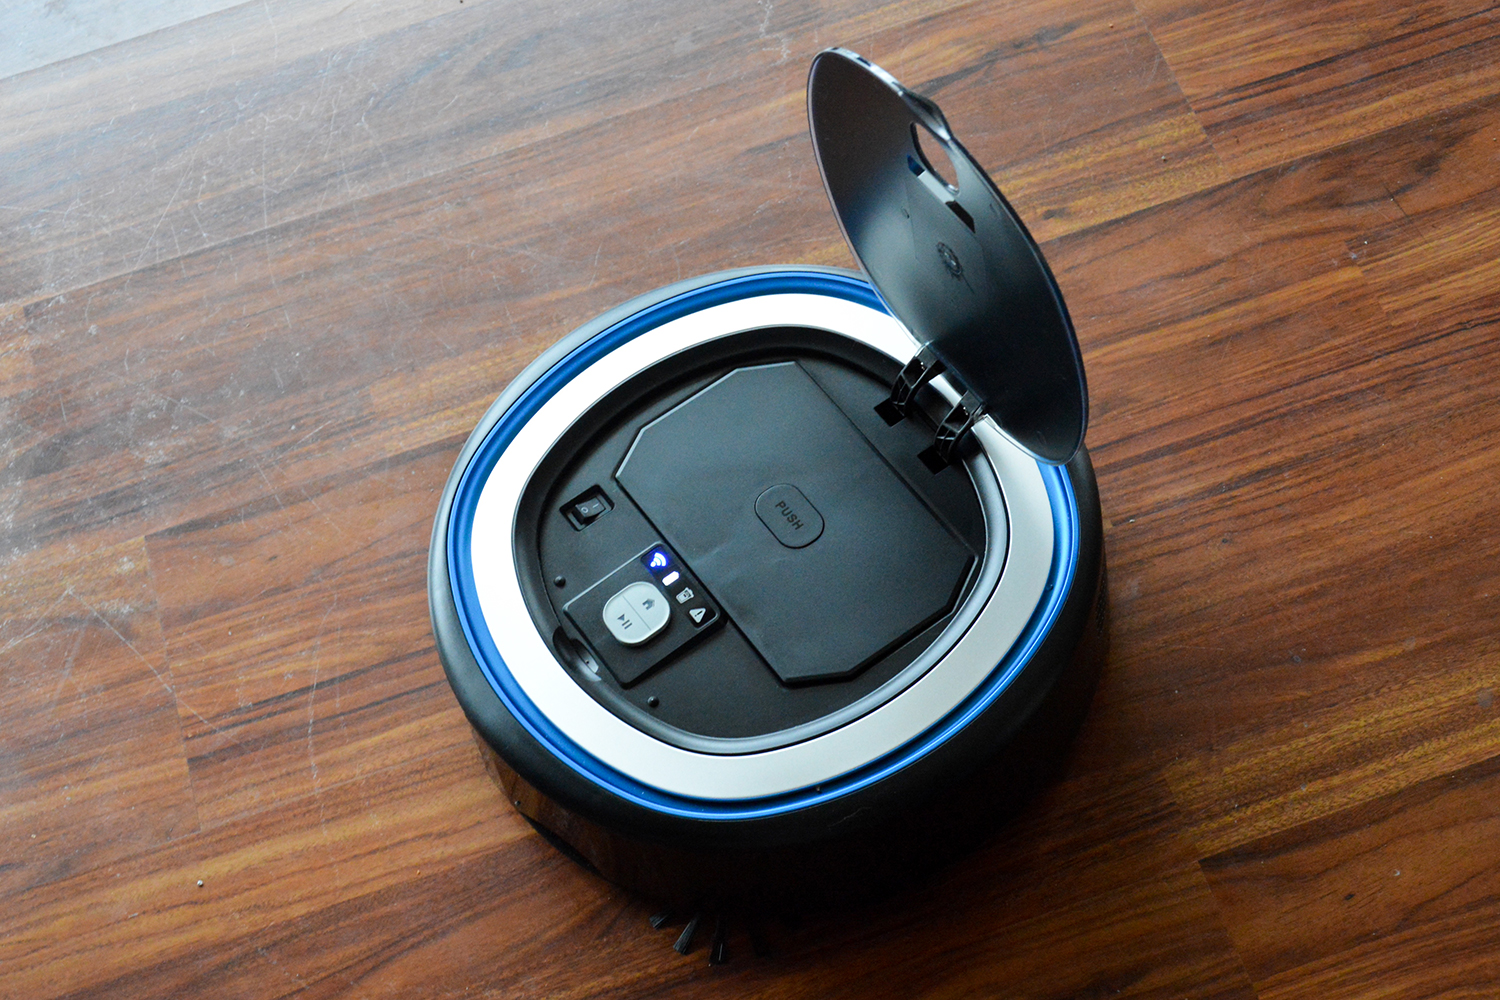 Hoover Rogue 970 robot vacuum review lid up